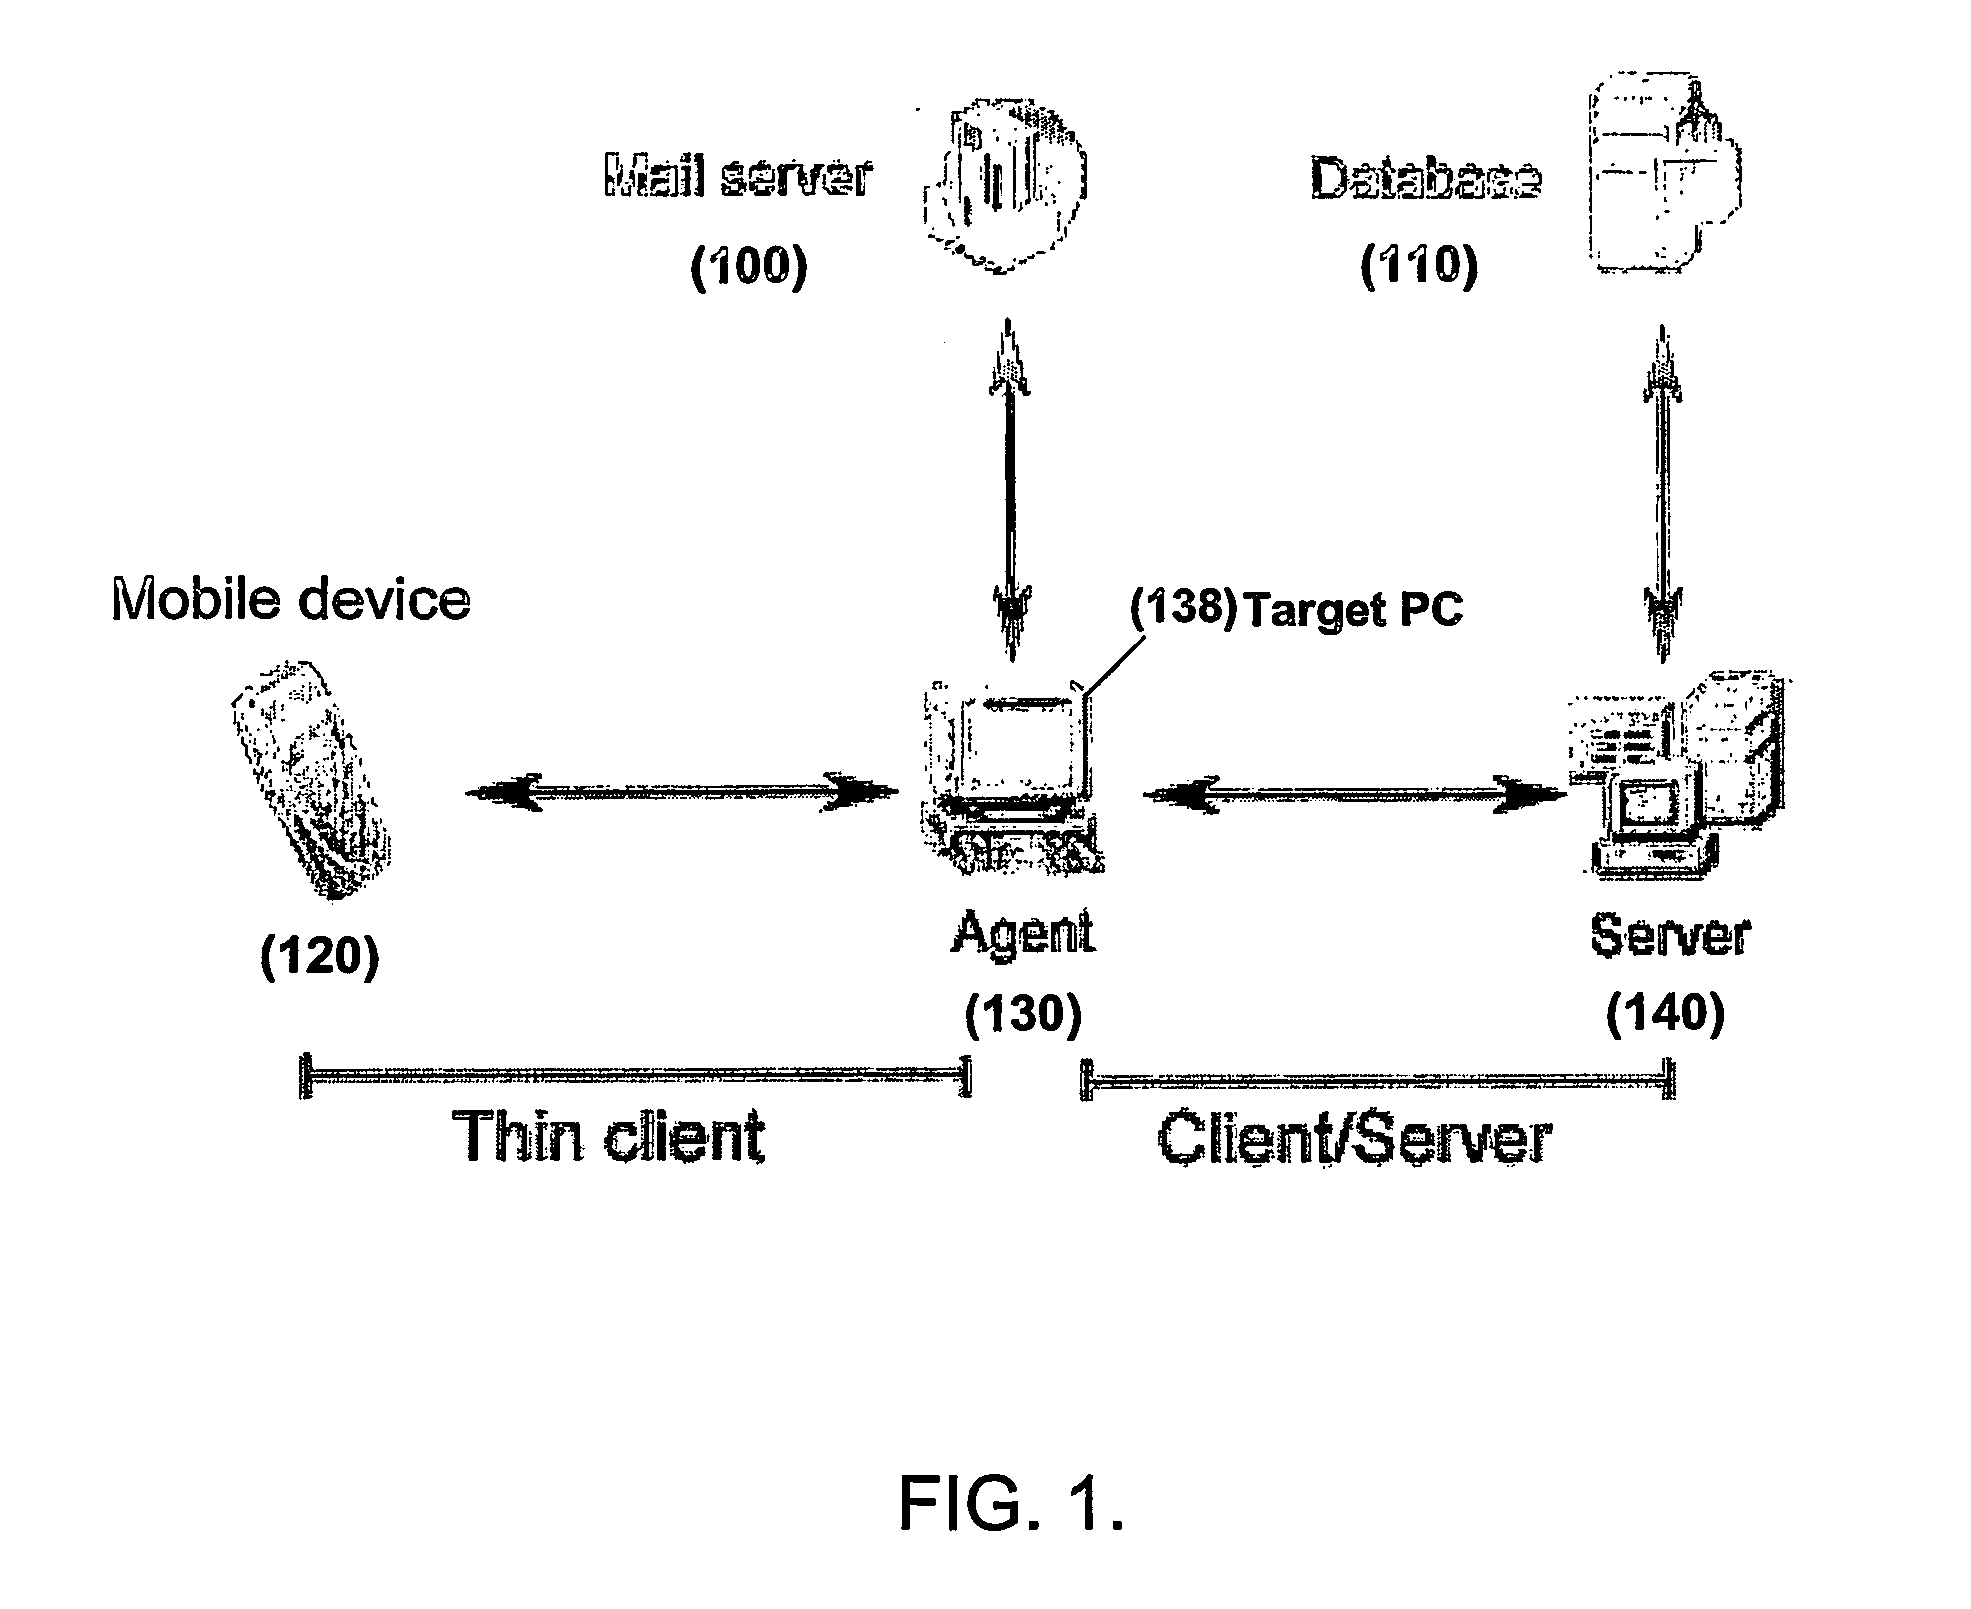 System and method for mobile e-mail management